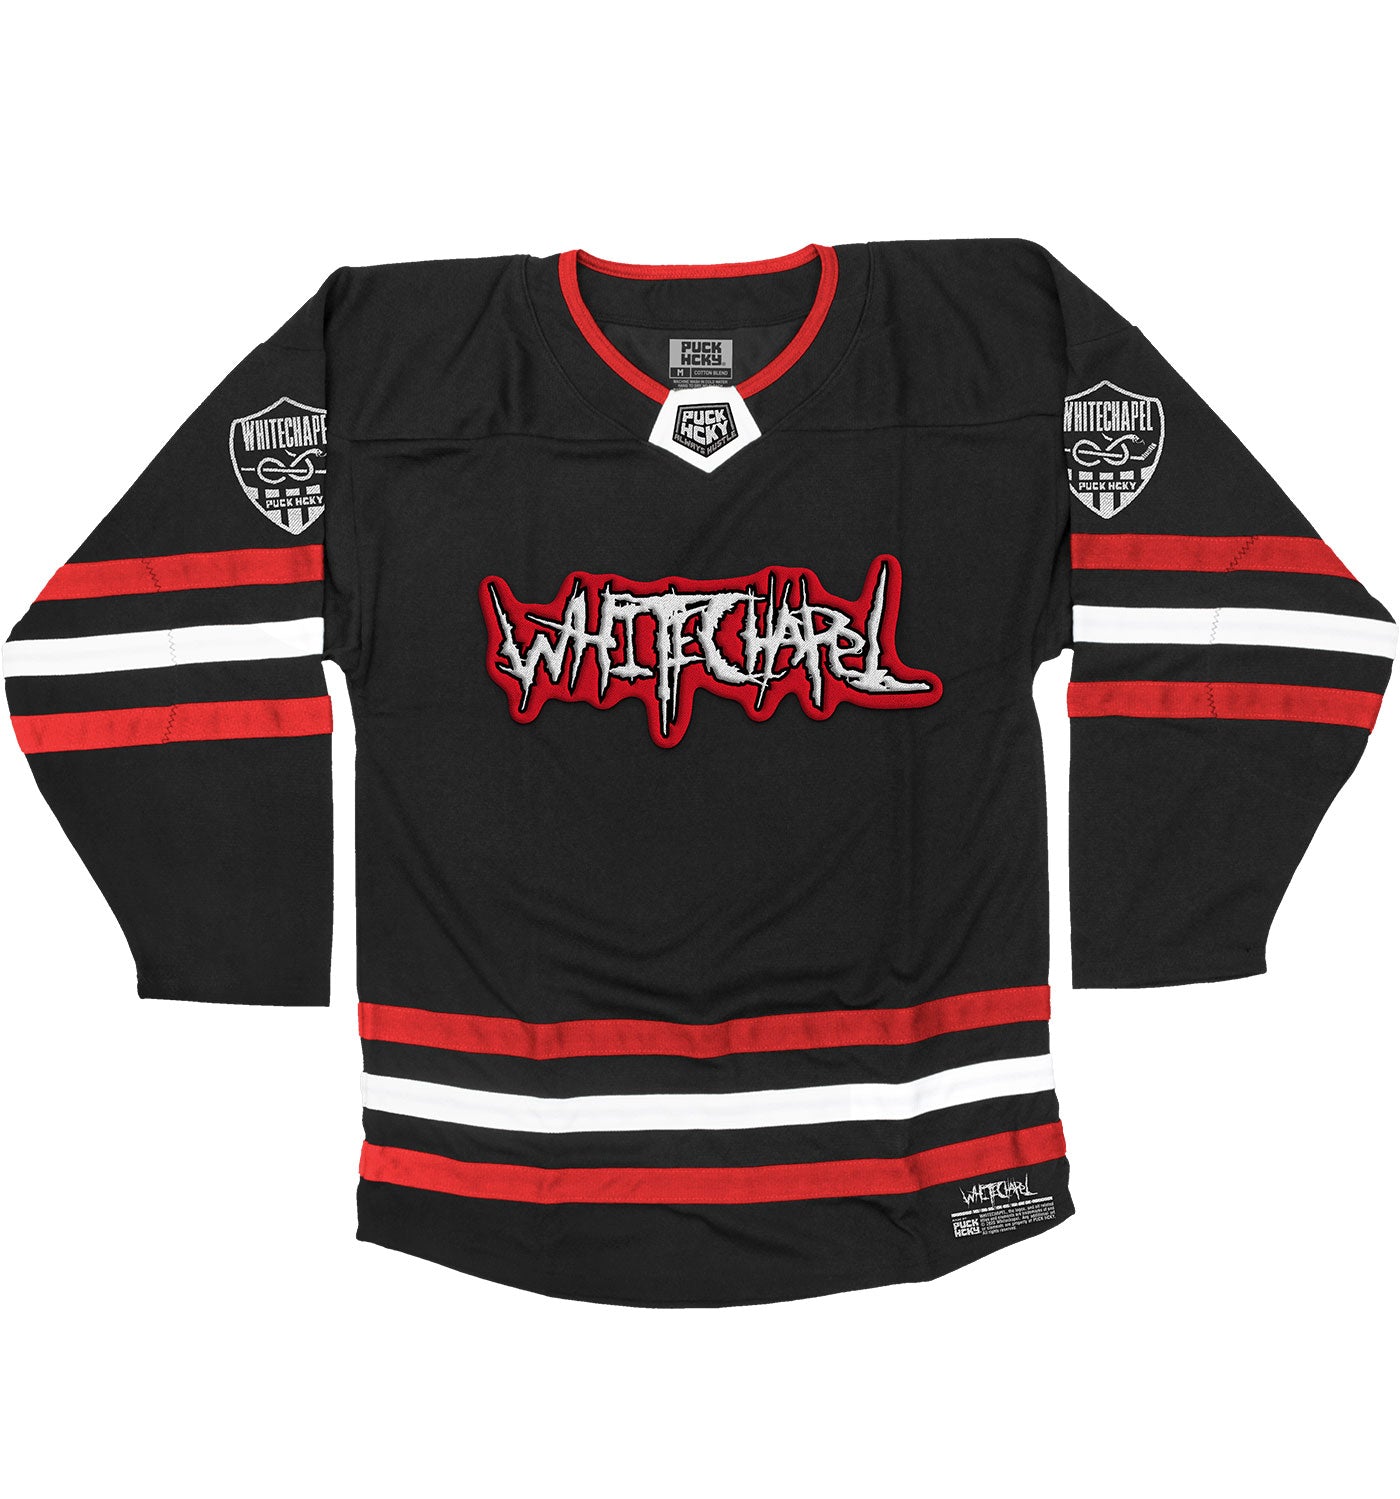 WHITECHAPEL 'REPROGRAMMED TO SKATE' deluxe hockey jersey in black, red, and white front view